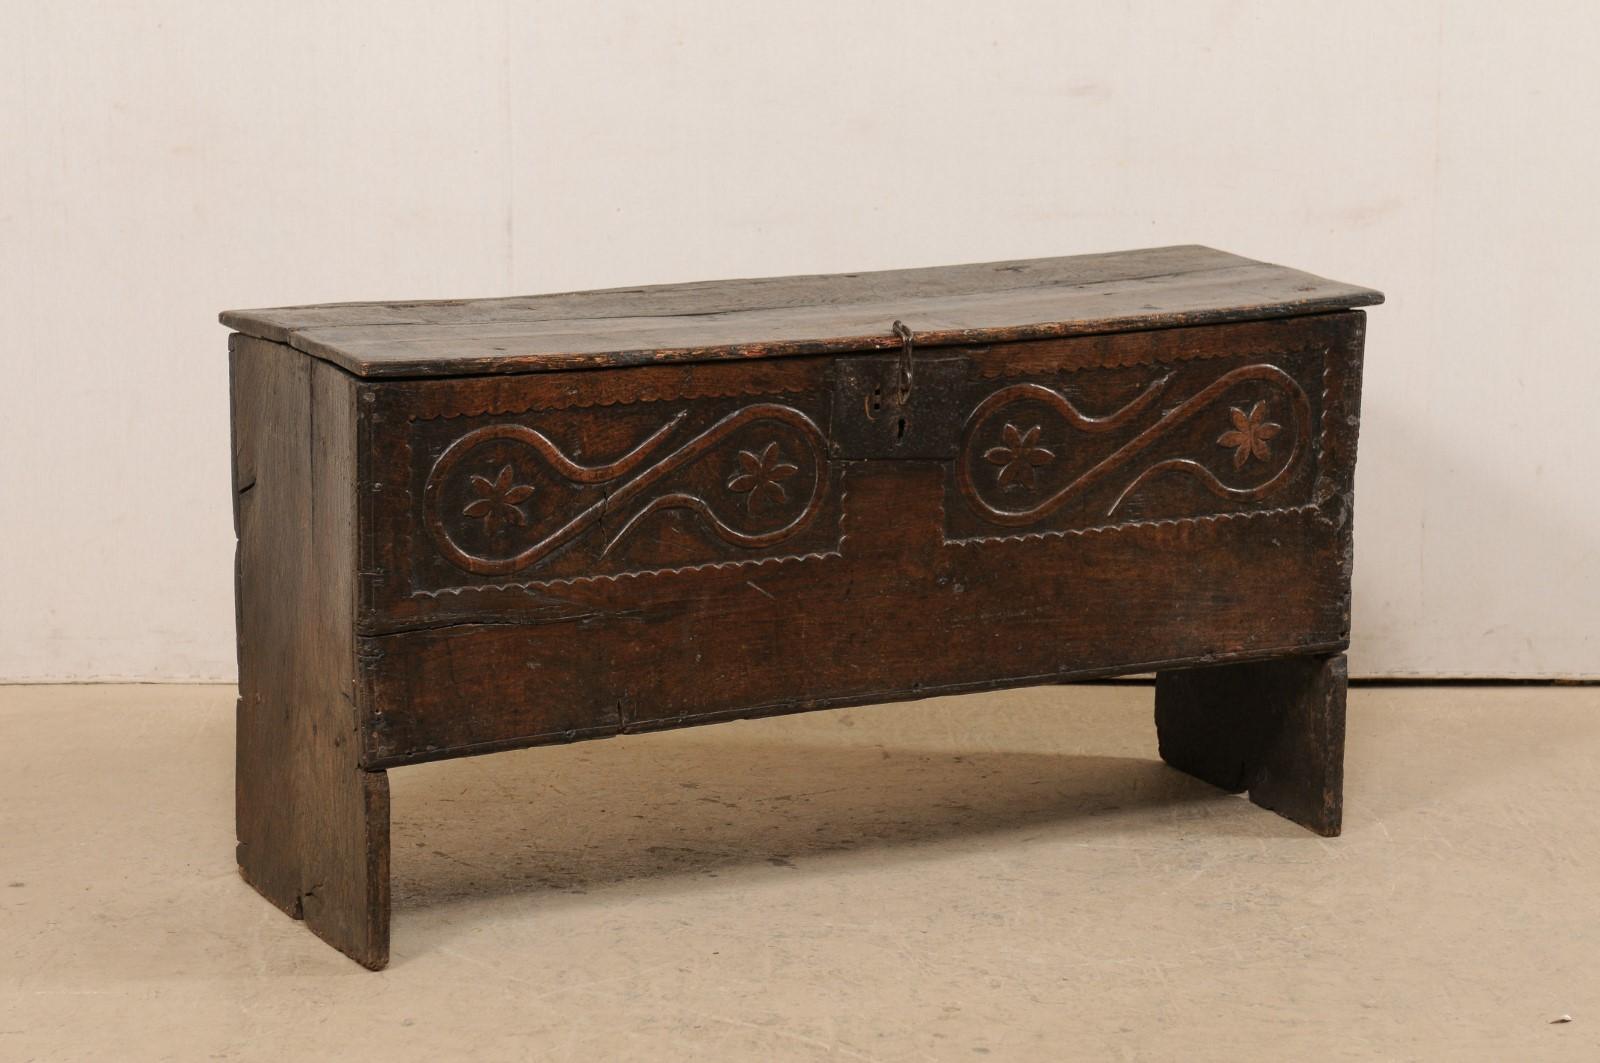 An Italian larger-sized carved wood cassone (trunk), with it's original iron hardware, from the 18th century. This antique chest from Italy is exquisitely rustic, with front which has been whimsically, hand-carved with two raised panels with